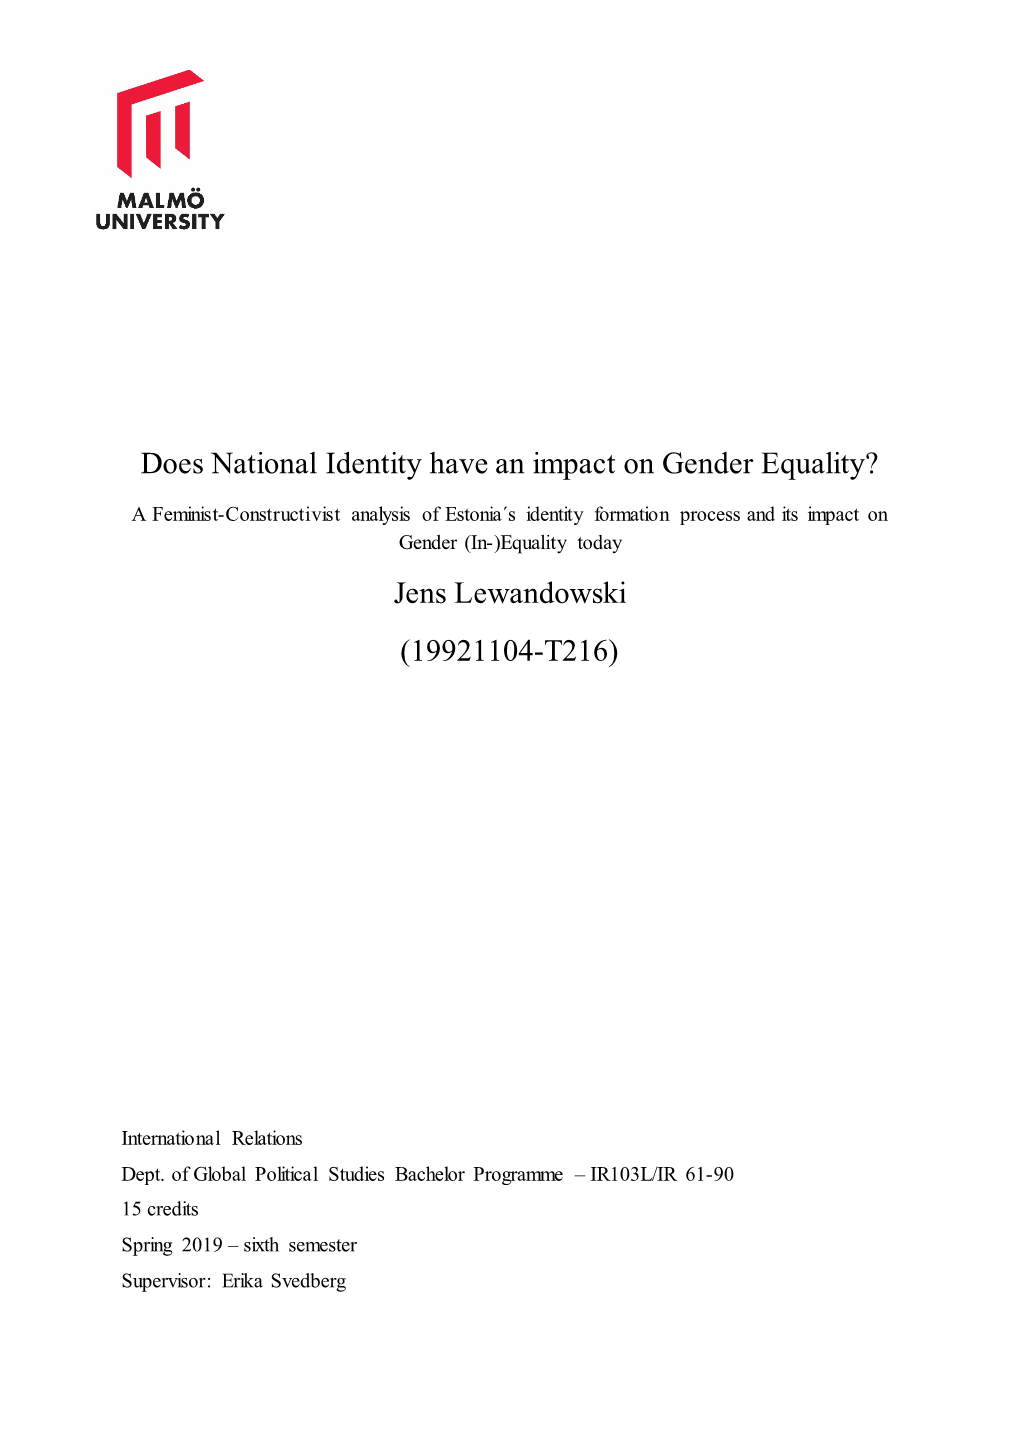 Does National Identity Have an Impact on Gender Equality?